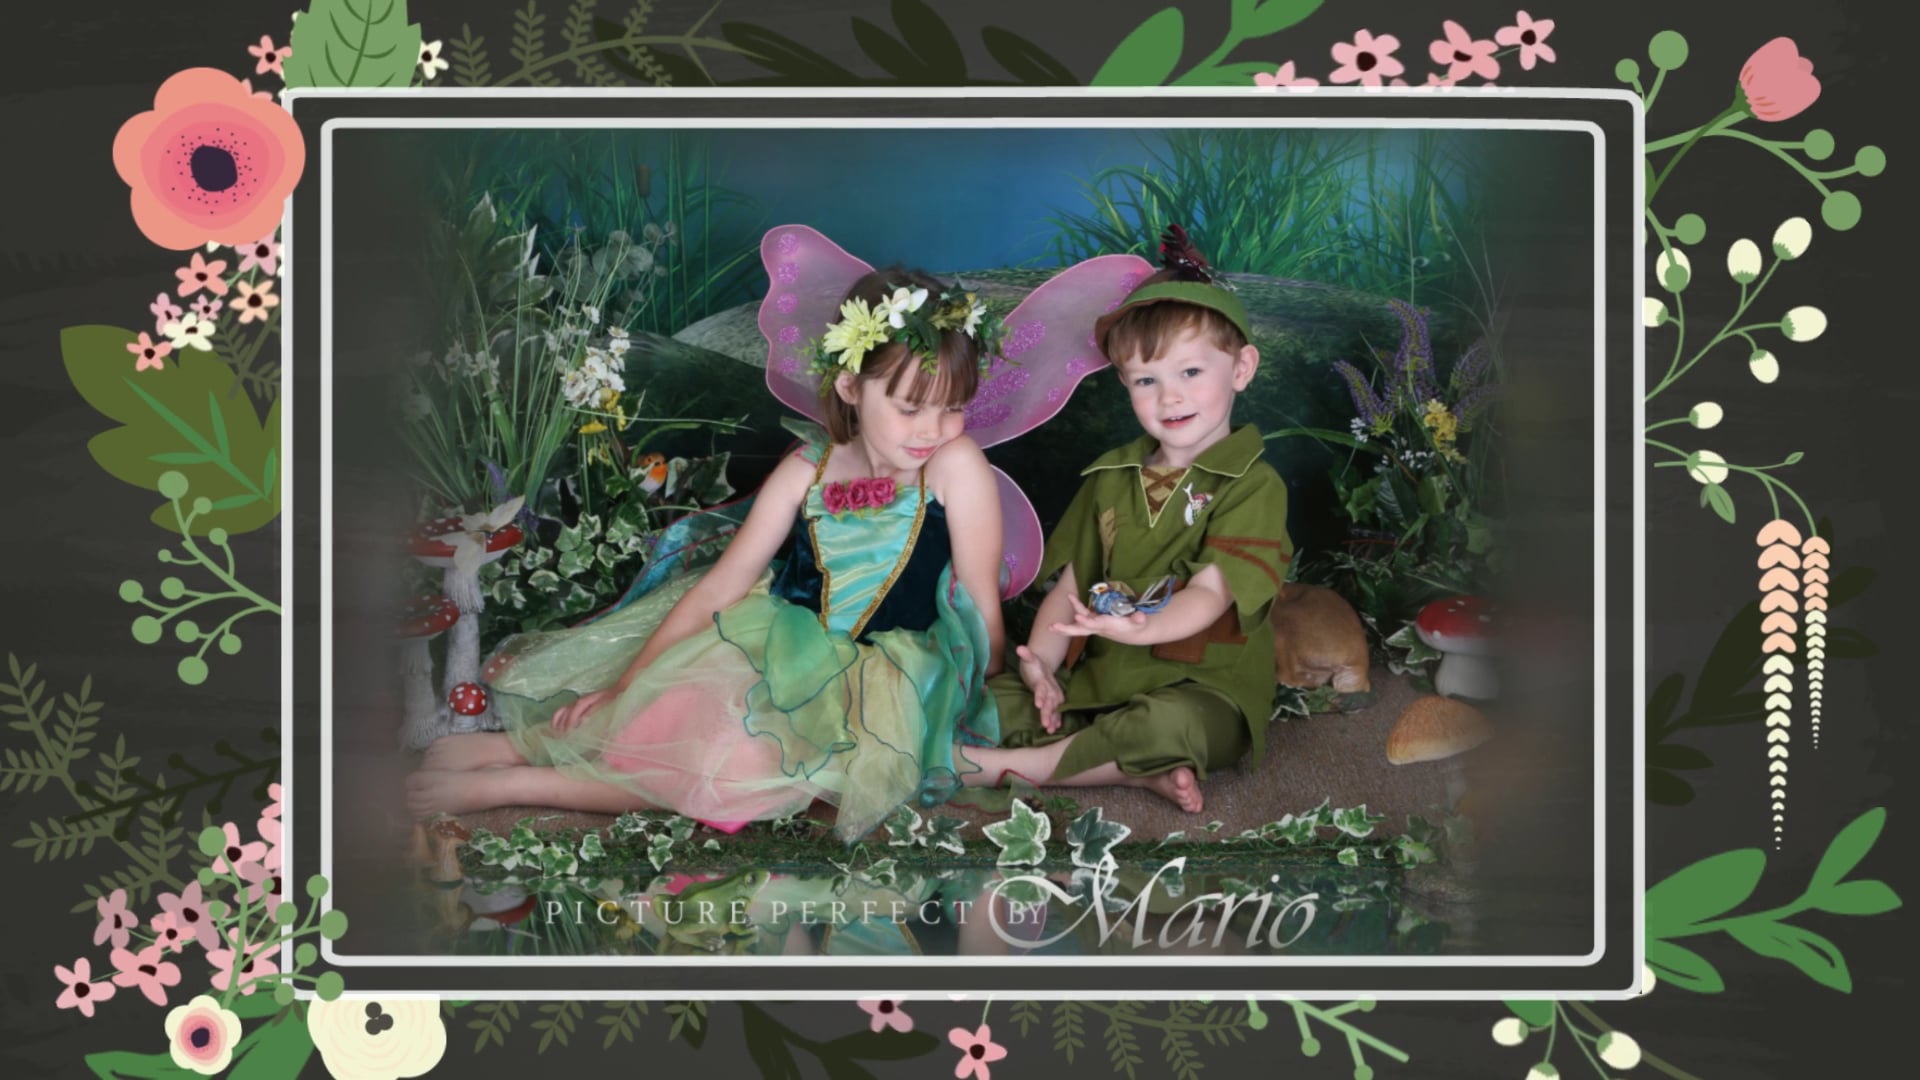 Amazing Creative Fairy & Elf Portraits By Mario at Picture Perfect